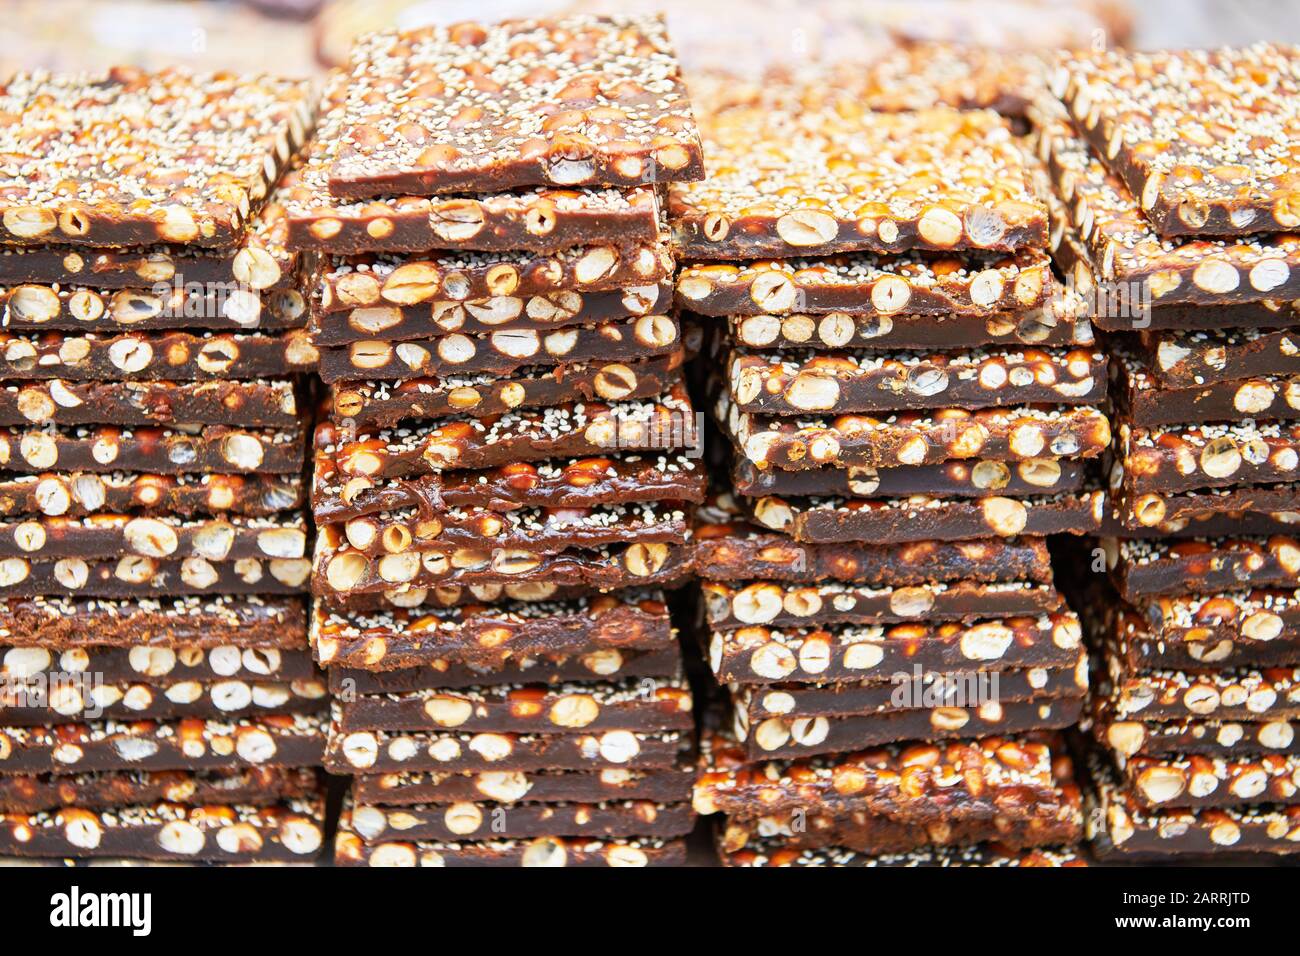 A pile of peanut brittle bars covered with sesame seeds for sale at a market in the Visayas, Philippines Stock Photo